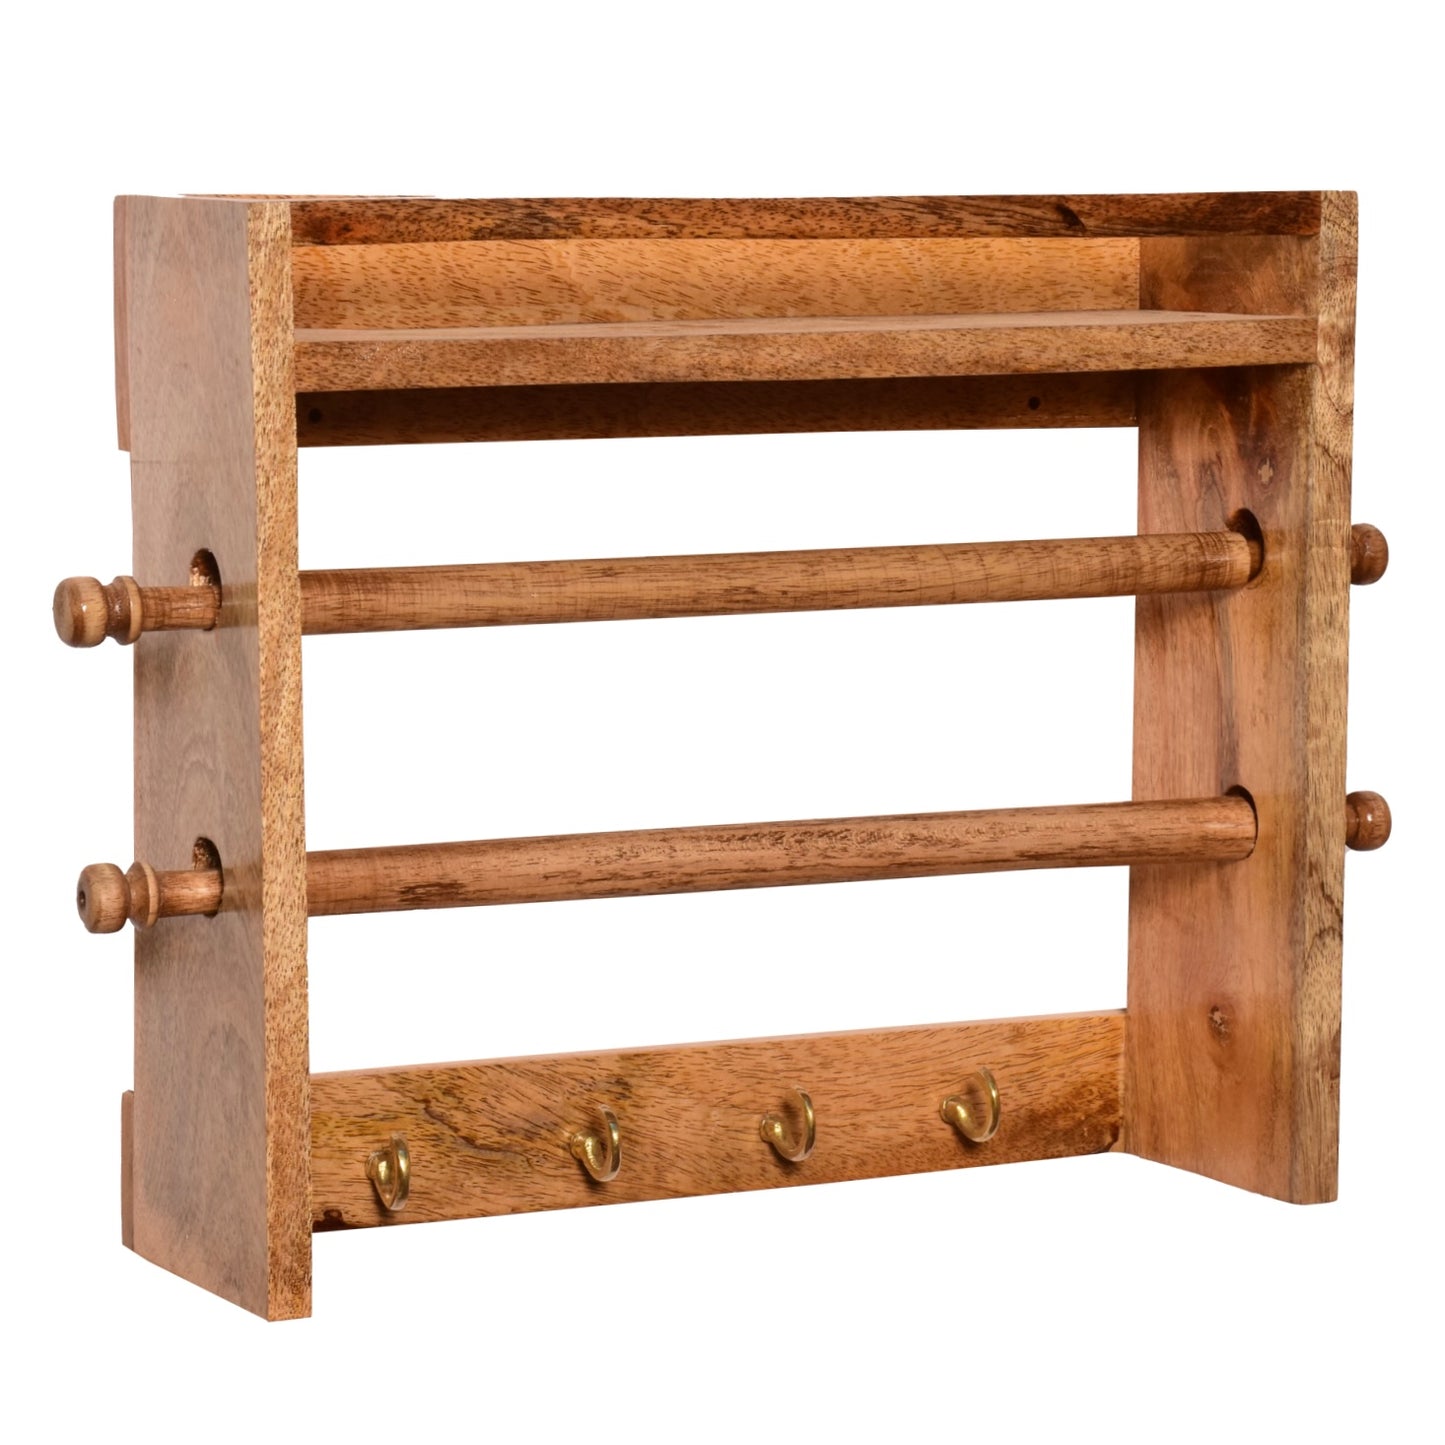 The Weaver's Nest Solid Wood Double Roll Paper Towel Holder / Tissue Paper Stand / Roll Dispenser with Spice Rack Shelf and Hooks for Kitchen